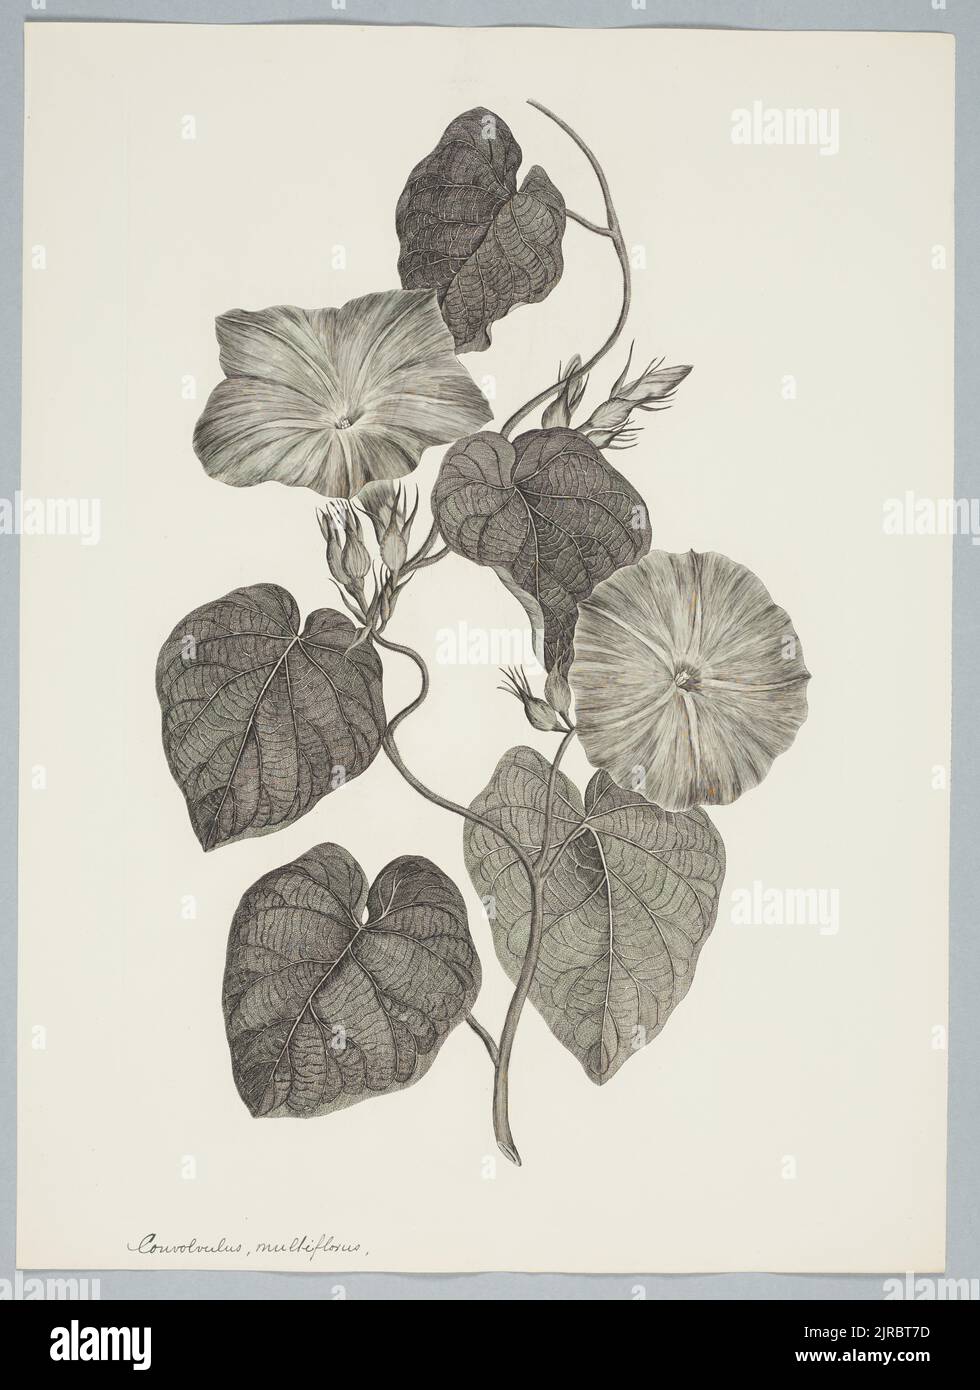 Ipomoea indica (Burman f.) Merrill, by Sydney Parkinson. Gift of the British Museum, 1895. Stock Photo